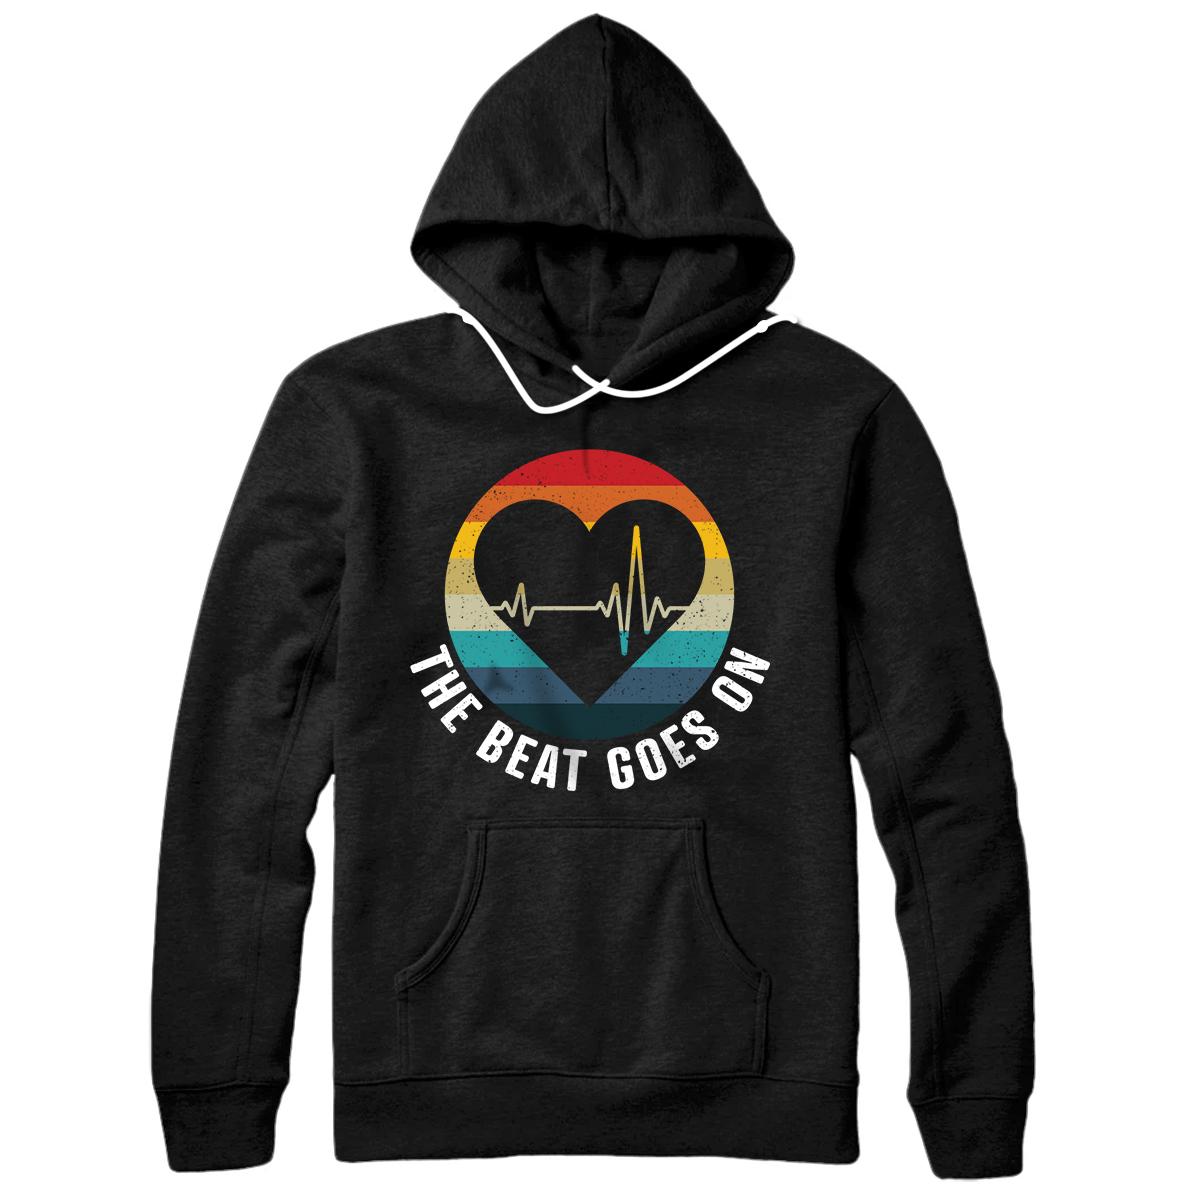 Personalized The beat goes on - heart attack survivor get well soon gift Pullover Hoodie